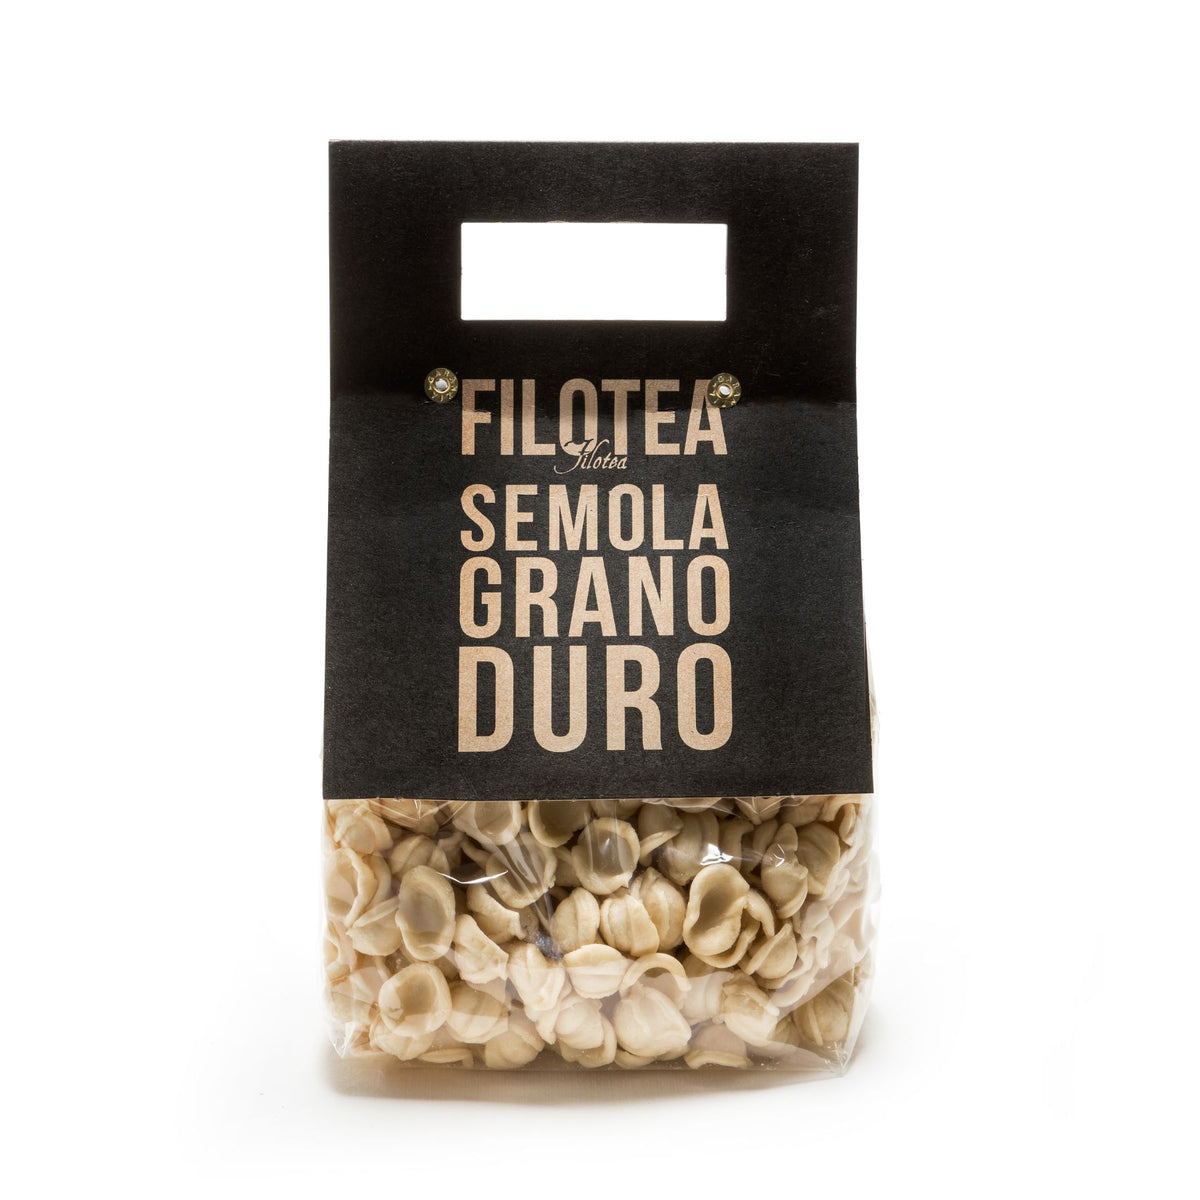 Filotea Orecchiette Durum Wheat Semolina Pasta 500g | Imported and distributed in the UK by Just Gourmet Foods